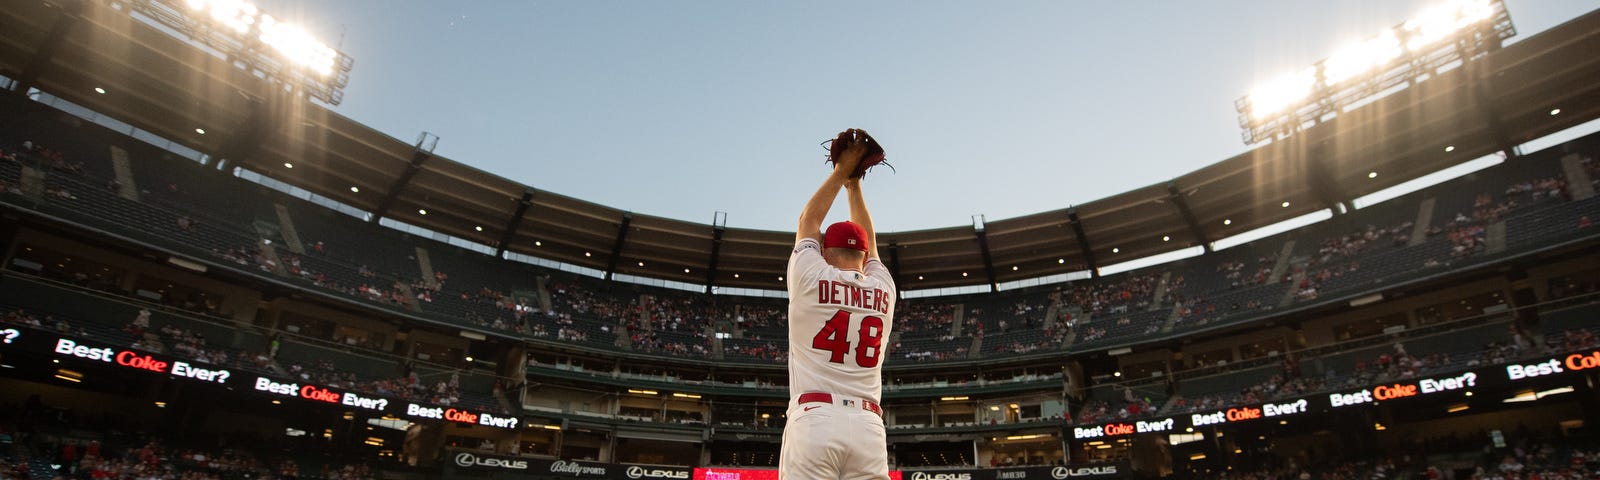 Best of: Throwback Weekend - The Halo Way